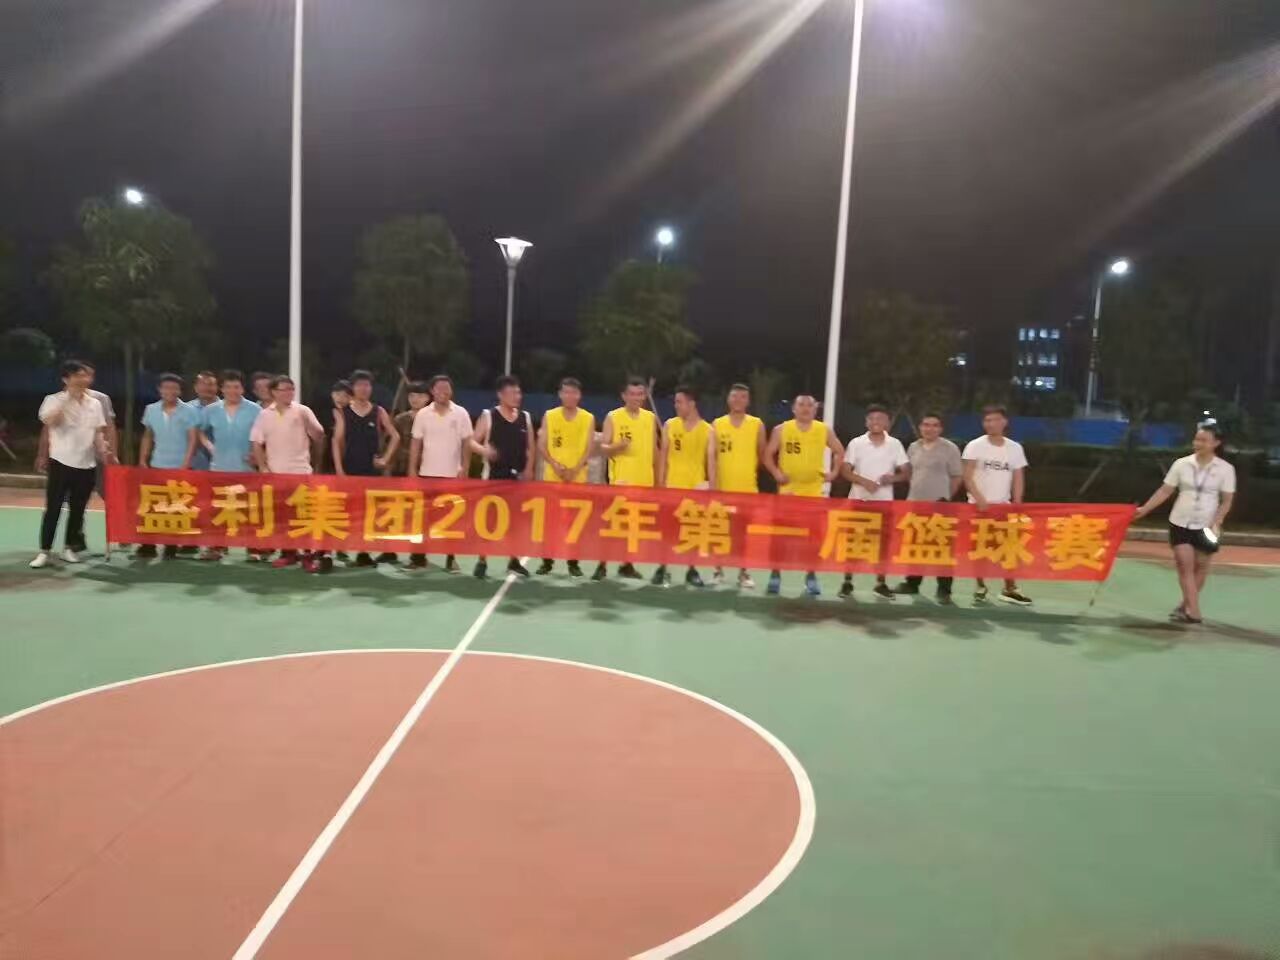 Shengli Group held the first basketball game